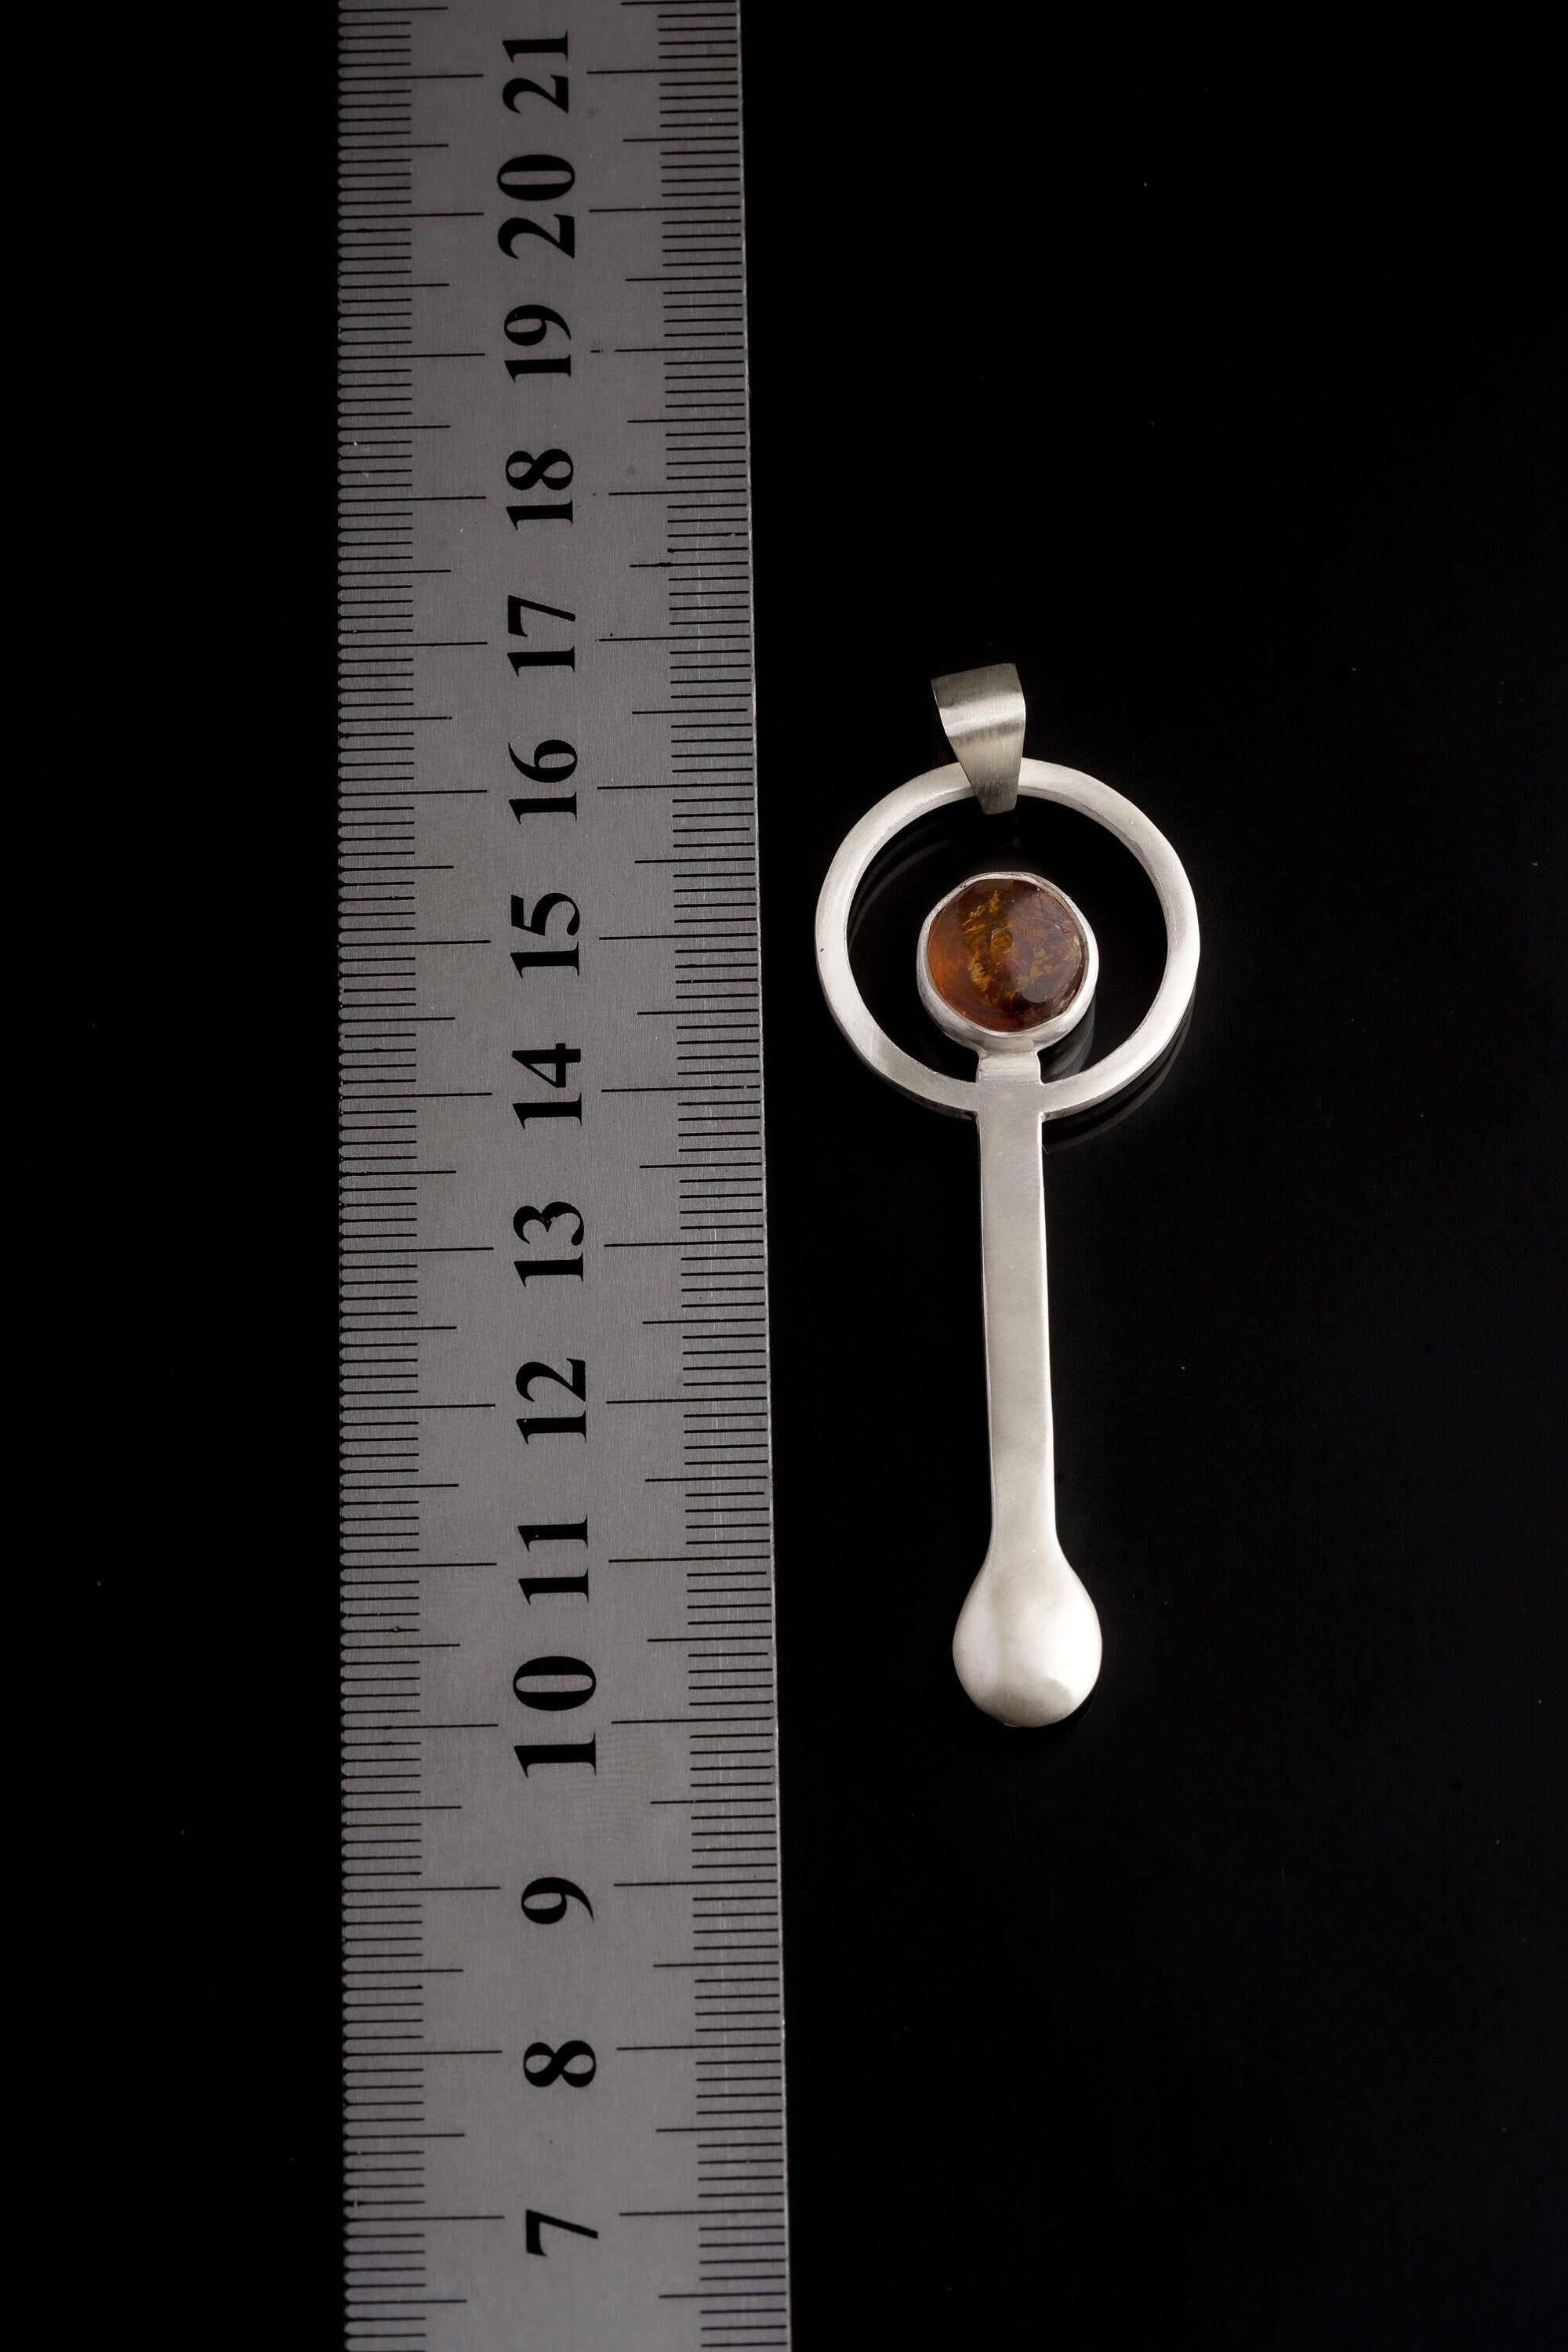 Mexican Amber - Small Spice Spoon - Solid 925 Cast Silver - Crystal Pendant Necklace